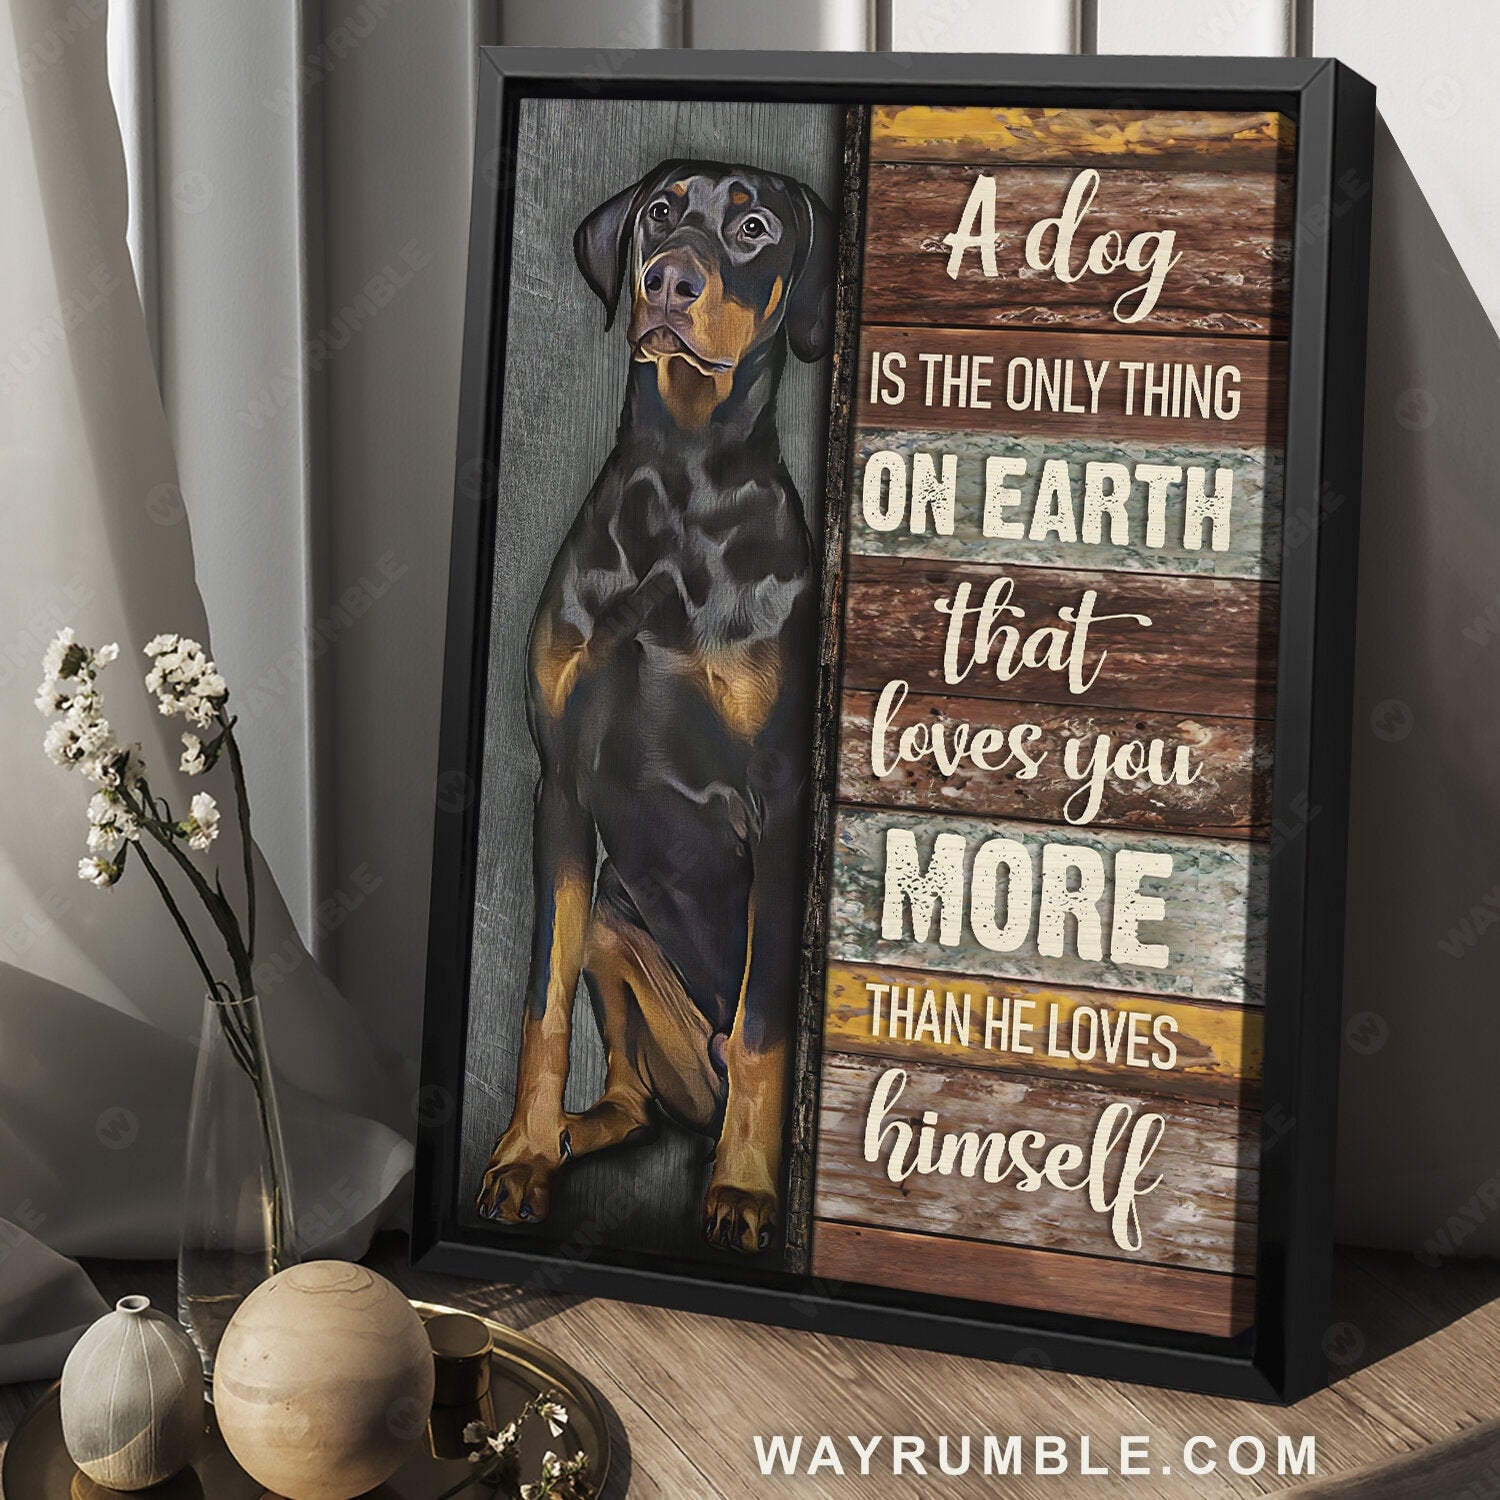 Doberman drawing, Animal painting, A dog is the only thing on earth - Dog Portrait Canvas Prints, Wall Art